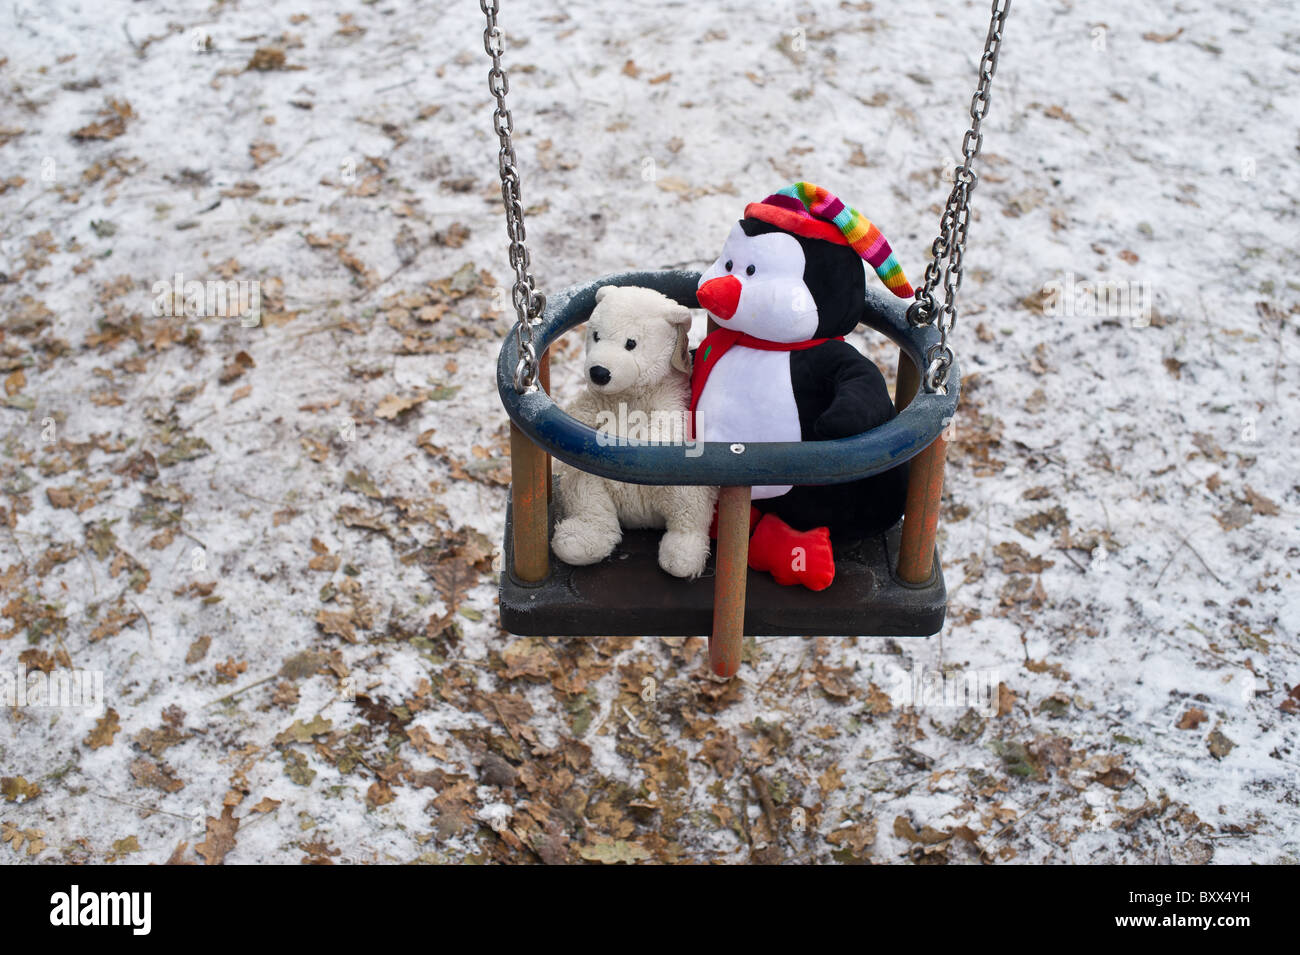 Stuffed toy polar bear and penguin in a swing on snowy ground. Stock Photo